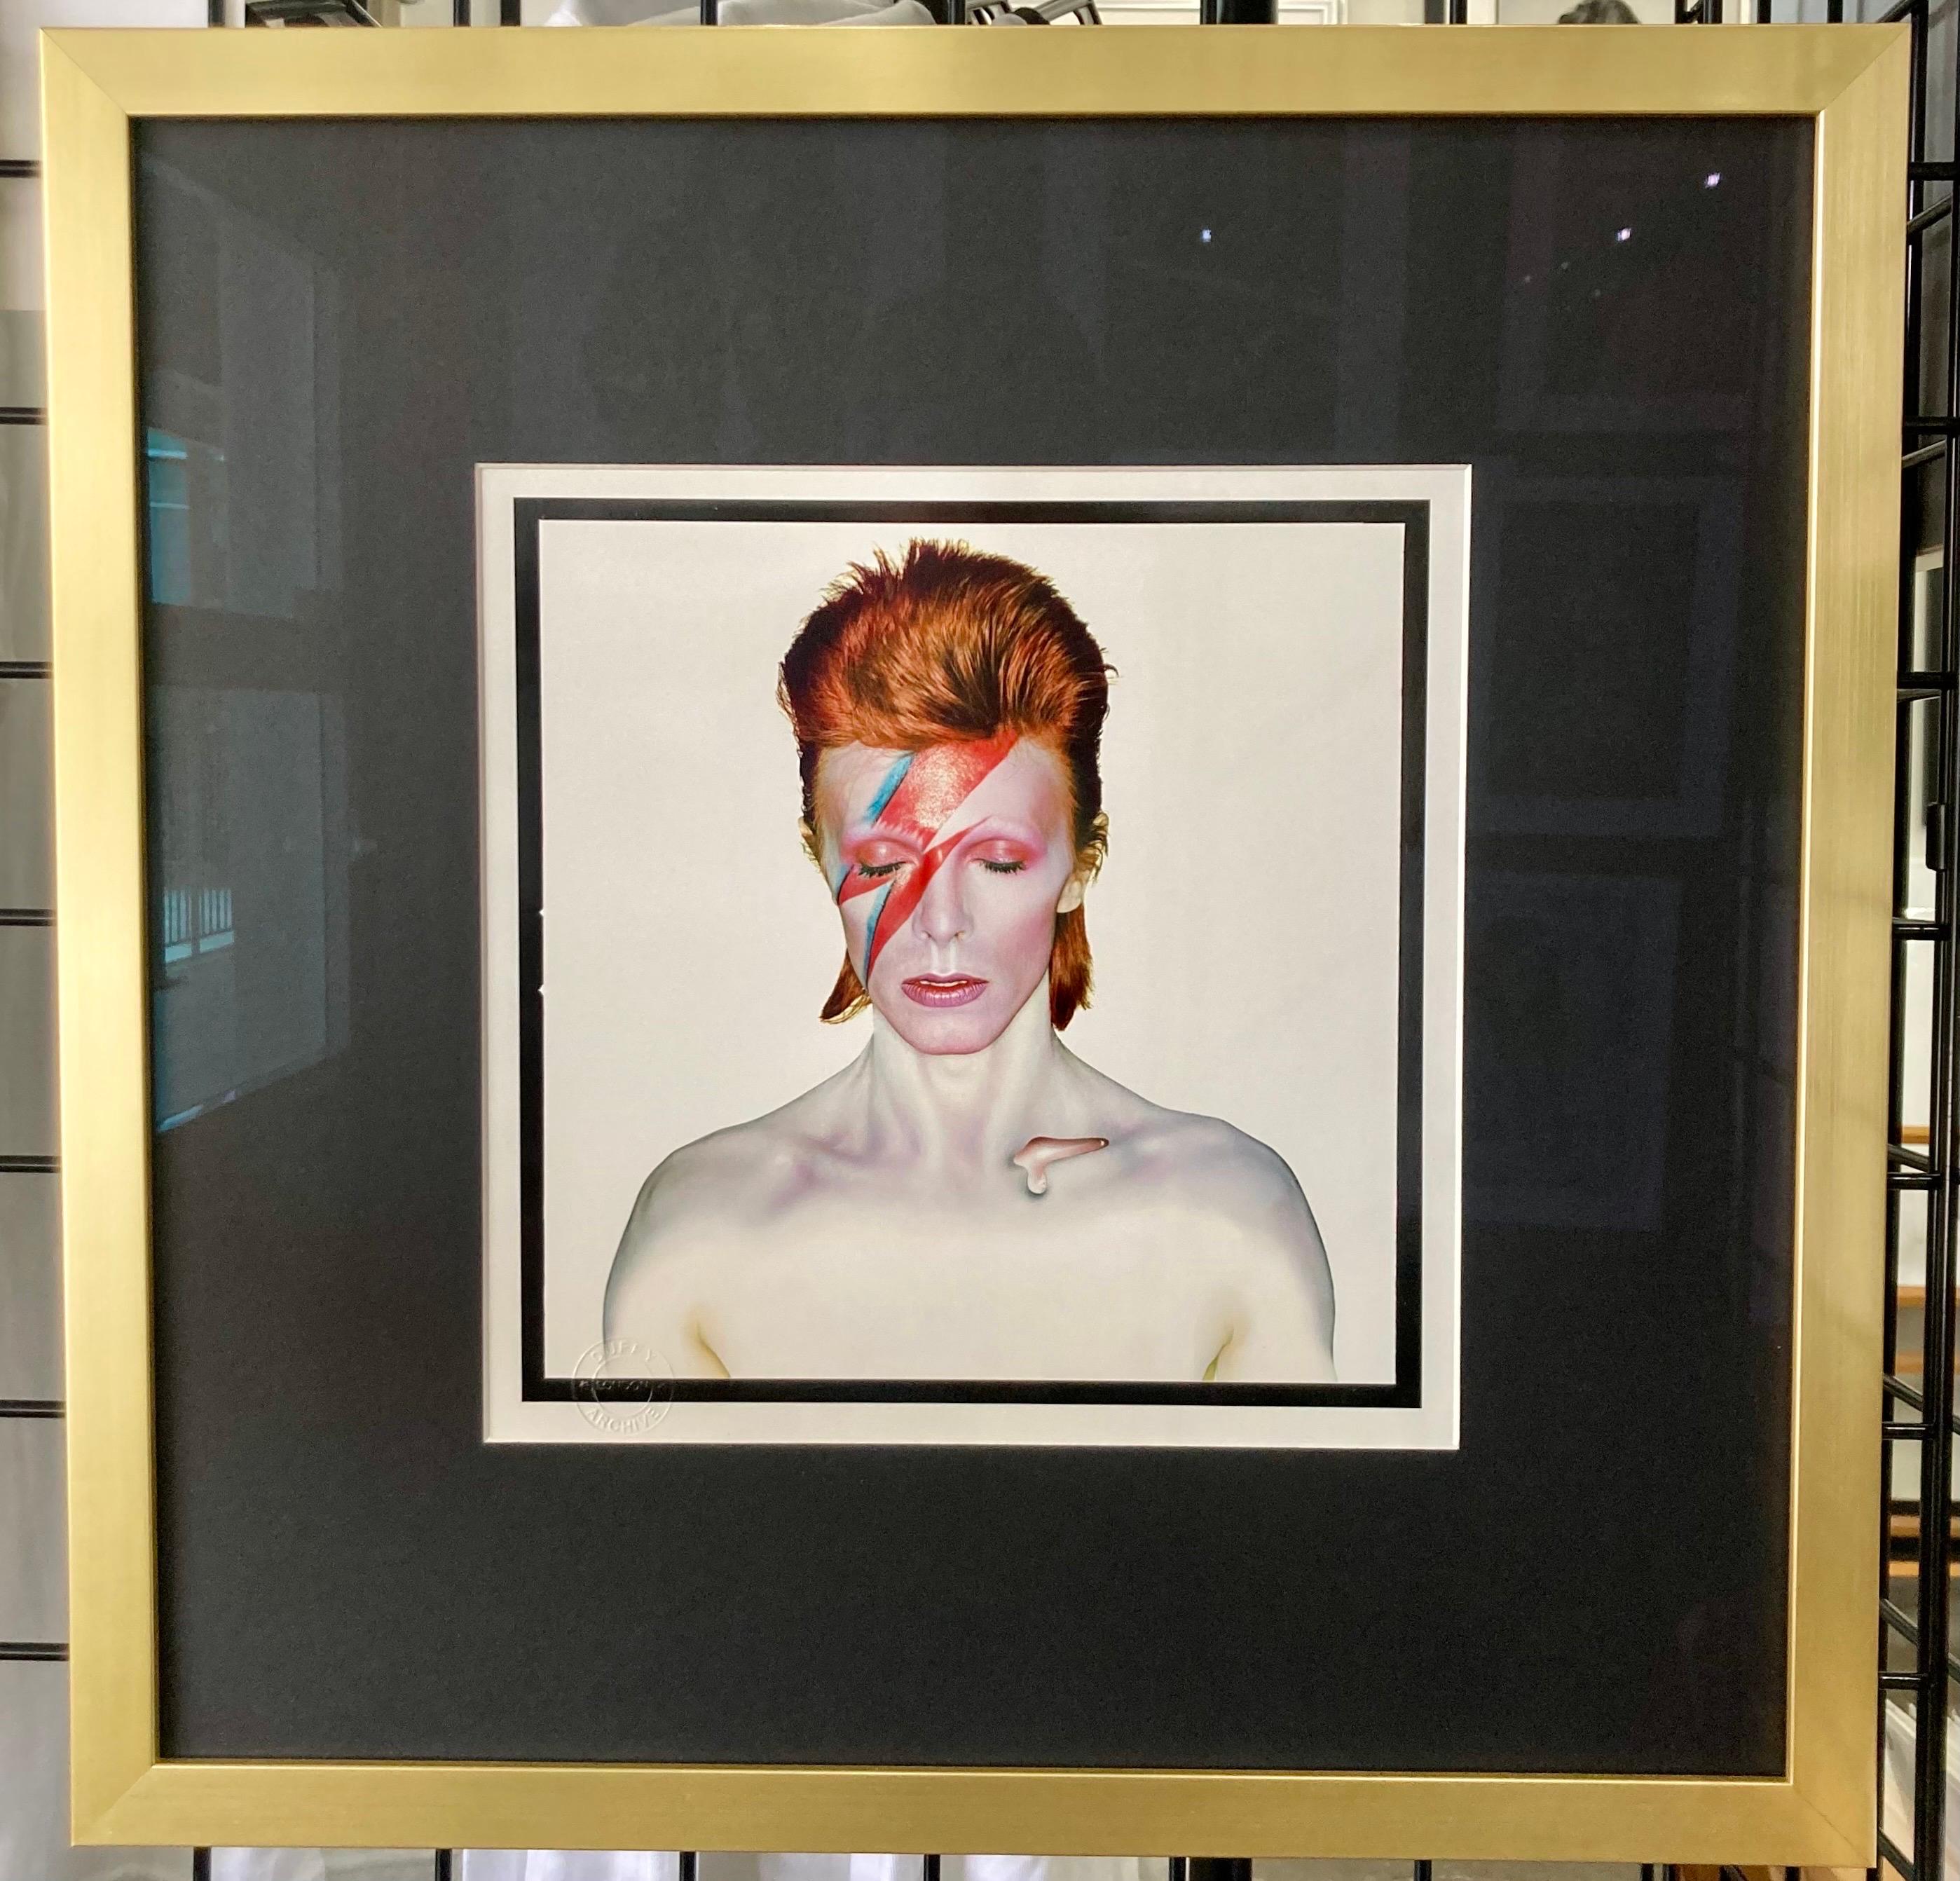 David Bowie Aladdin Sane by Brian Duffy with black mat and gold frame For Sale 1